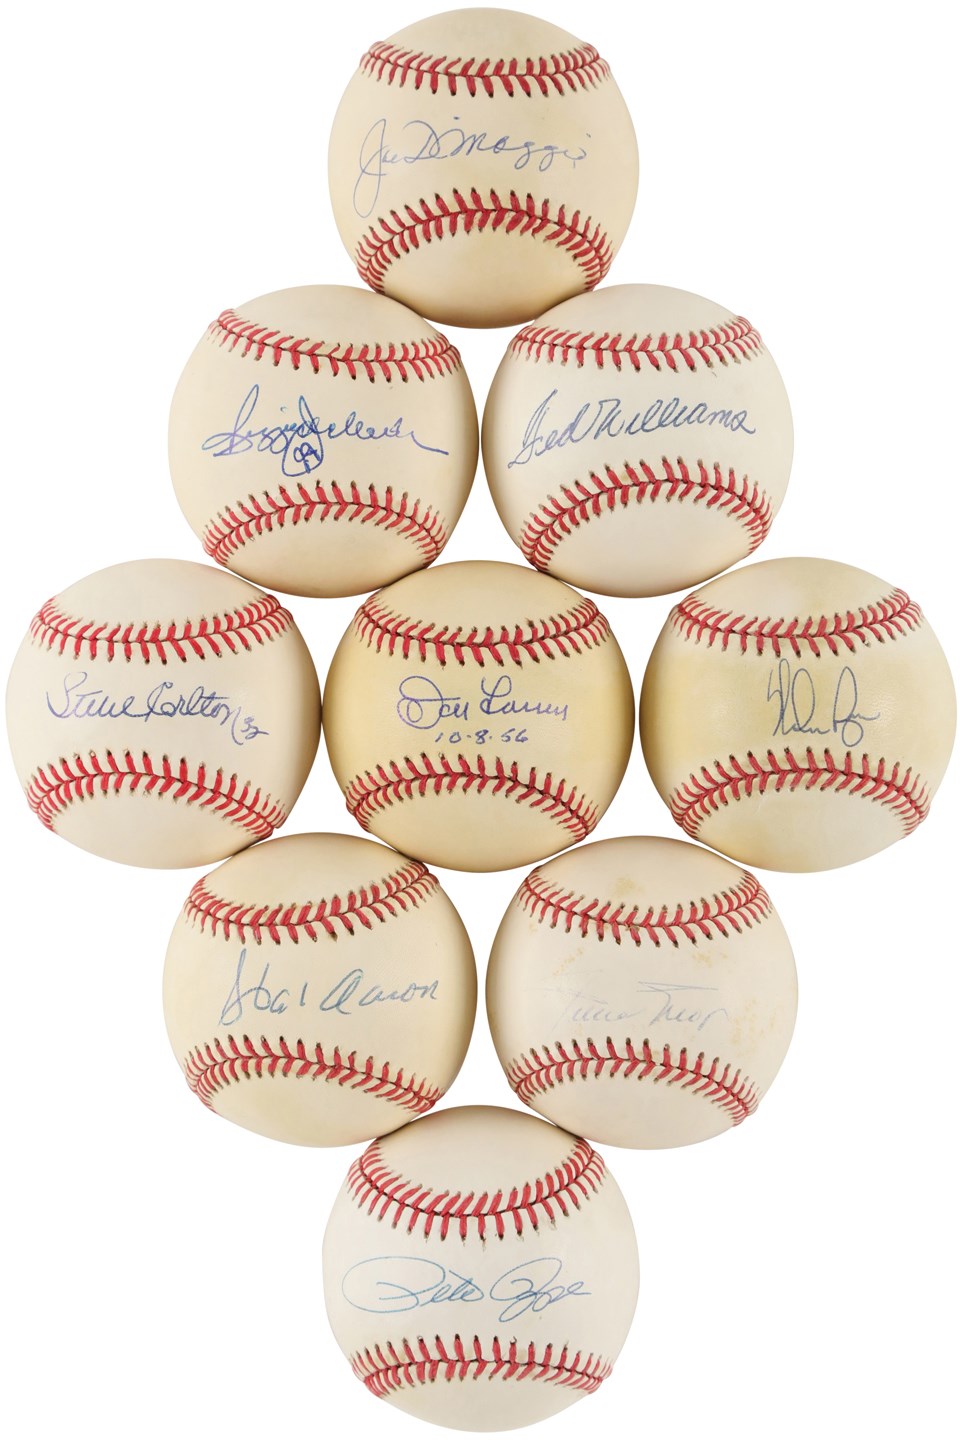 - 100 Plus Signed Baseball Collection